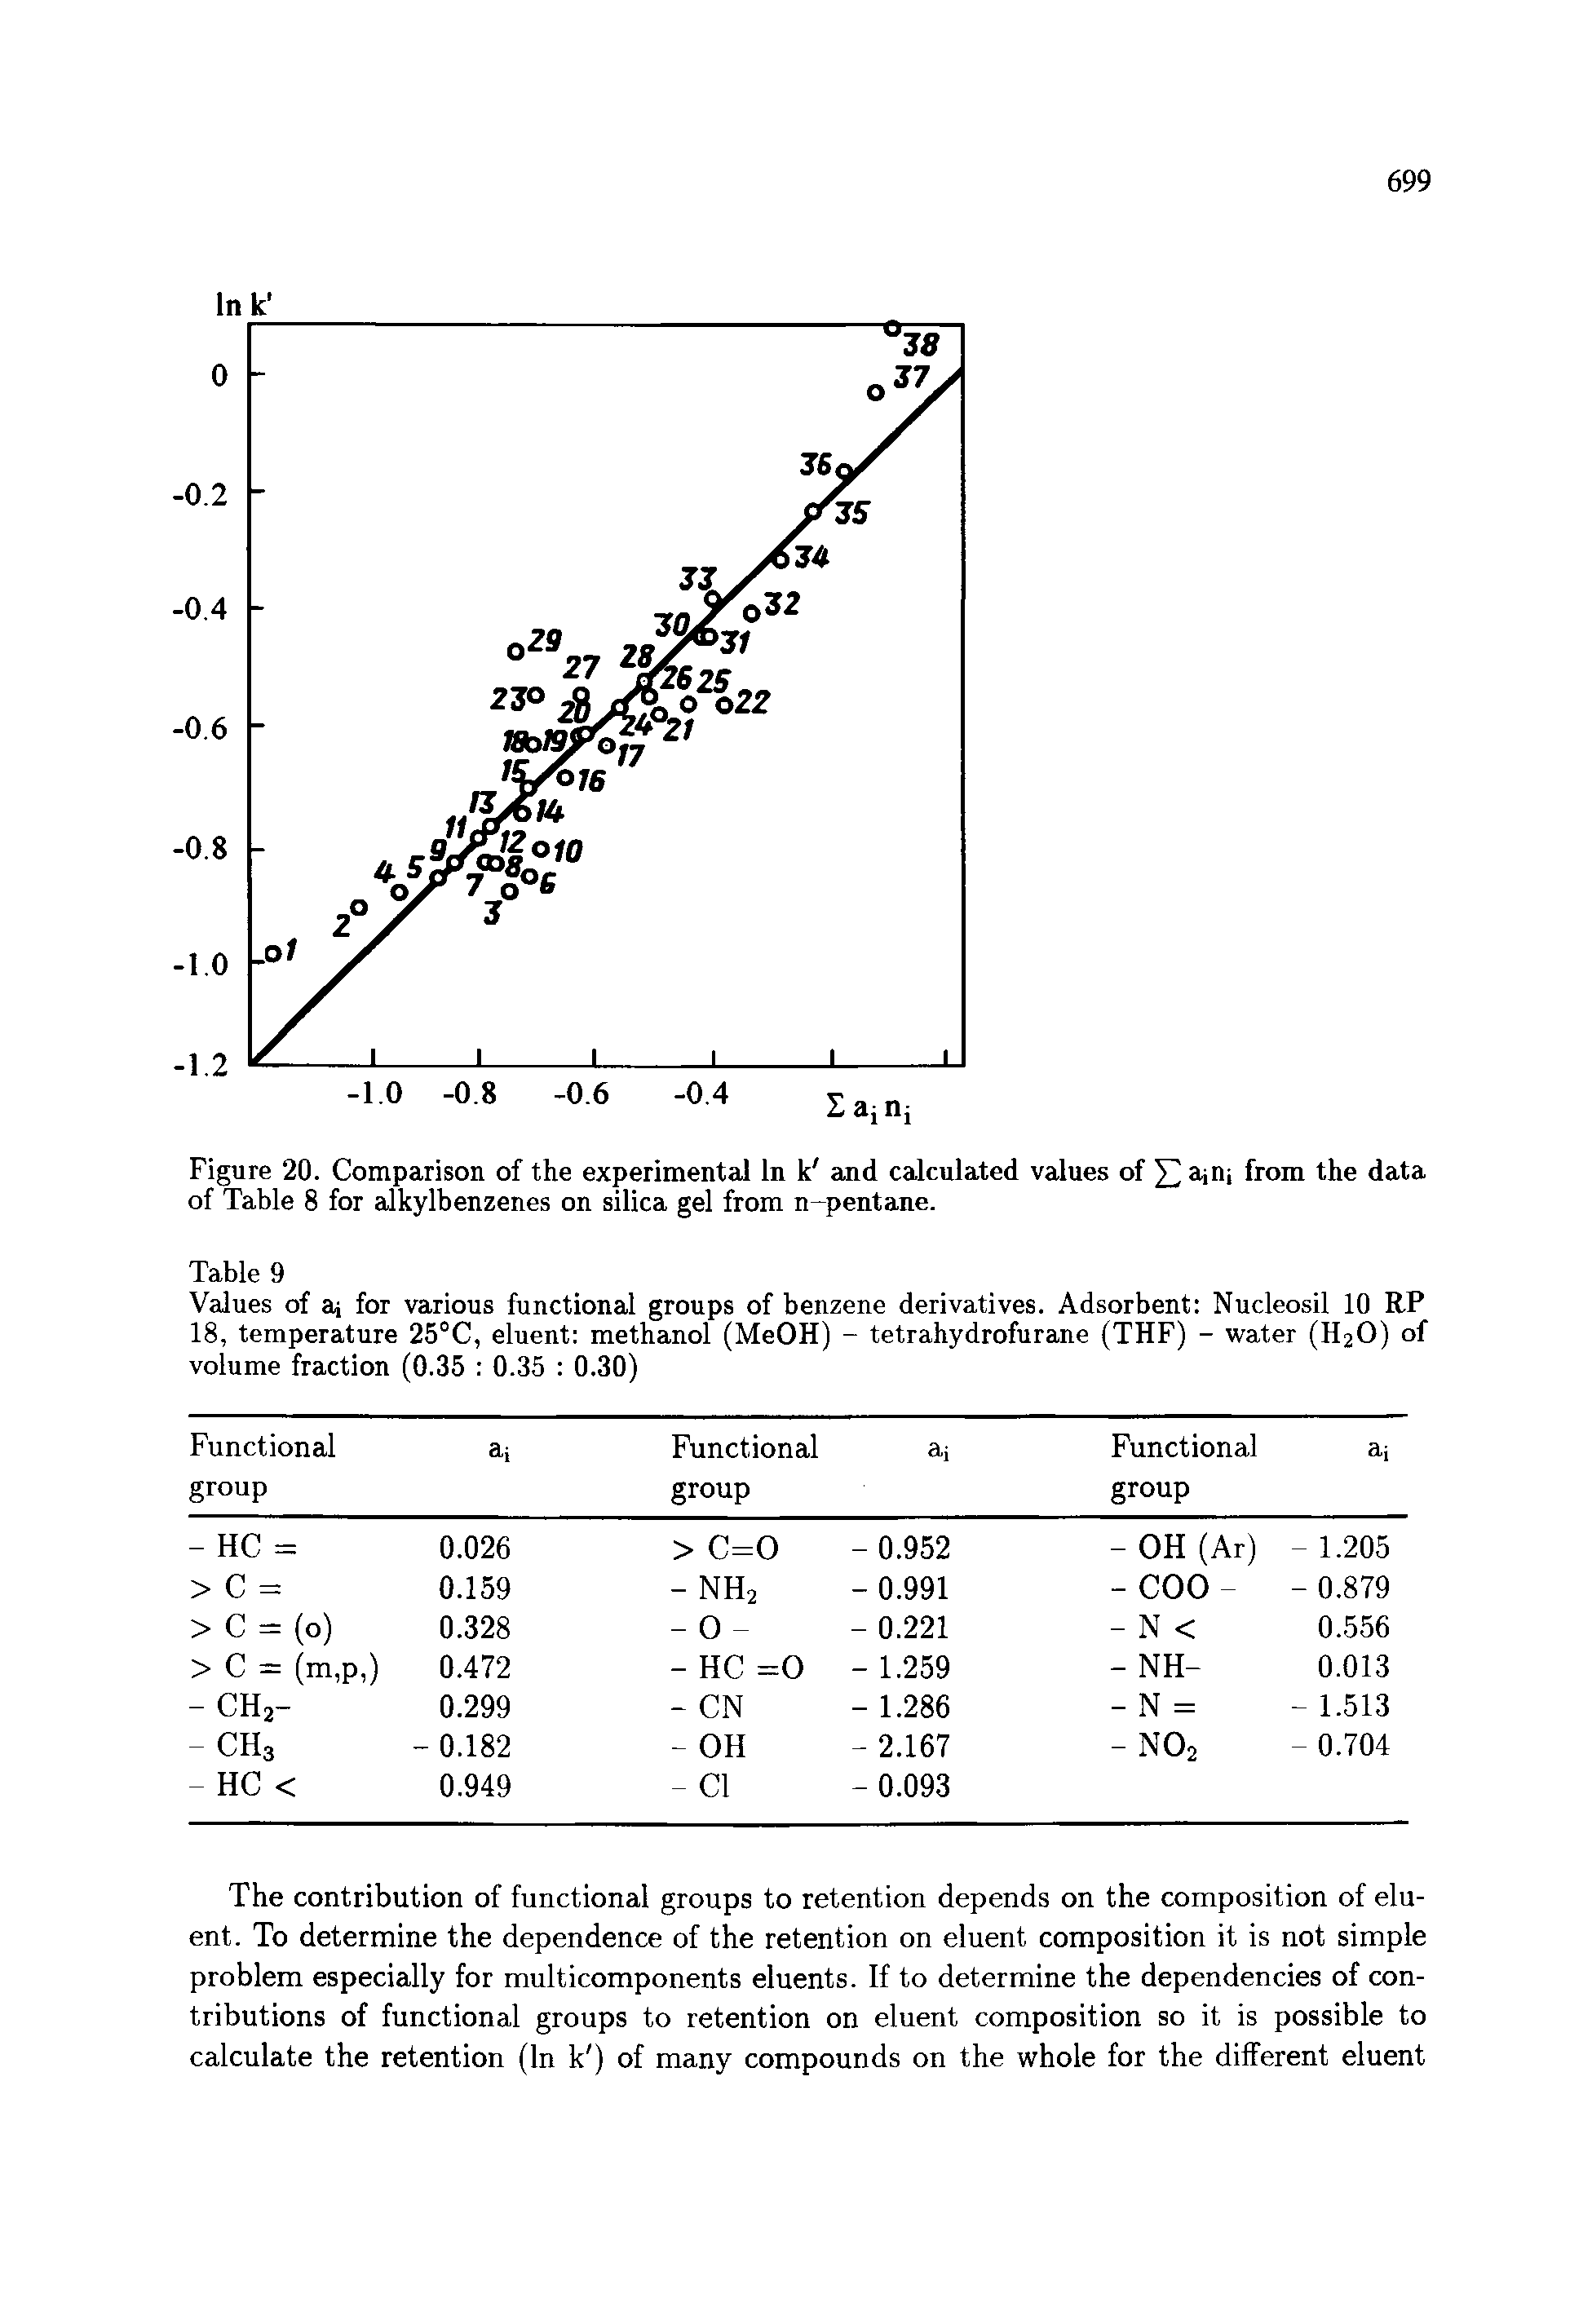 Figure 20. Comparison of the experimental In k and calculated values of aini from the data of Table 8 for alkylbenzenes on silica gel from n-pentane.